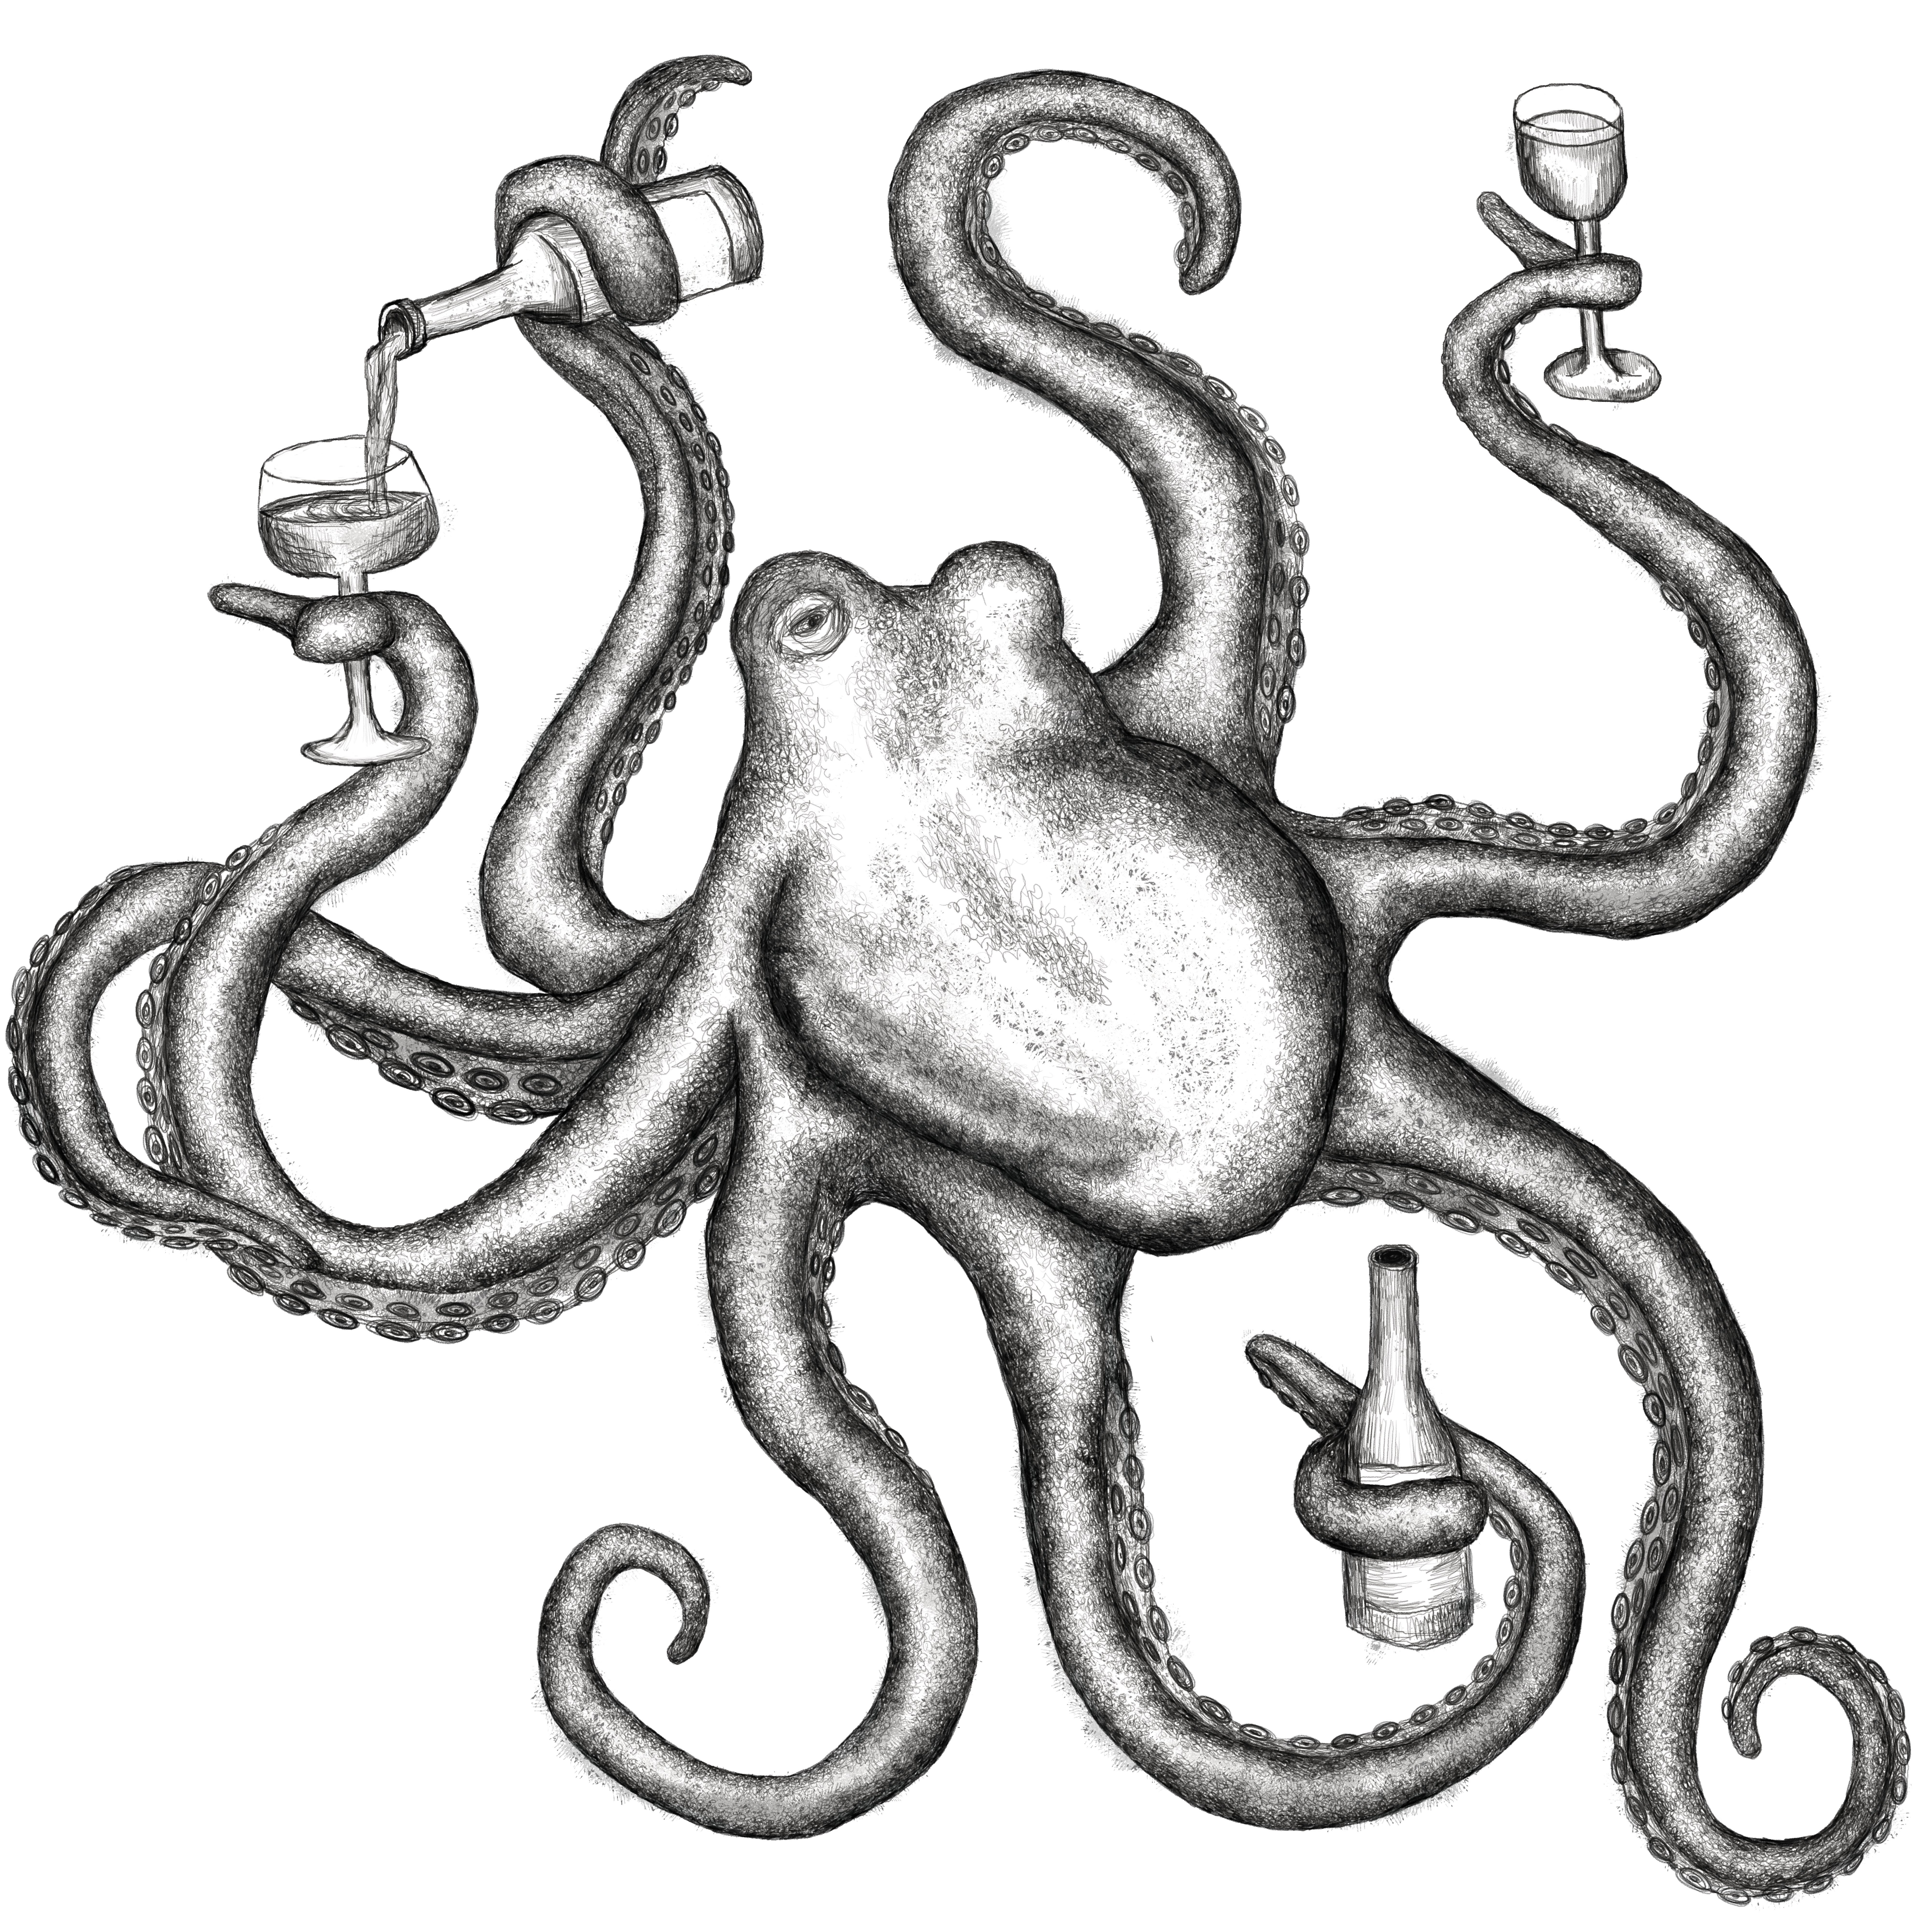 Octopus holding wine glasses and bottles